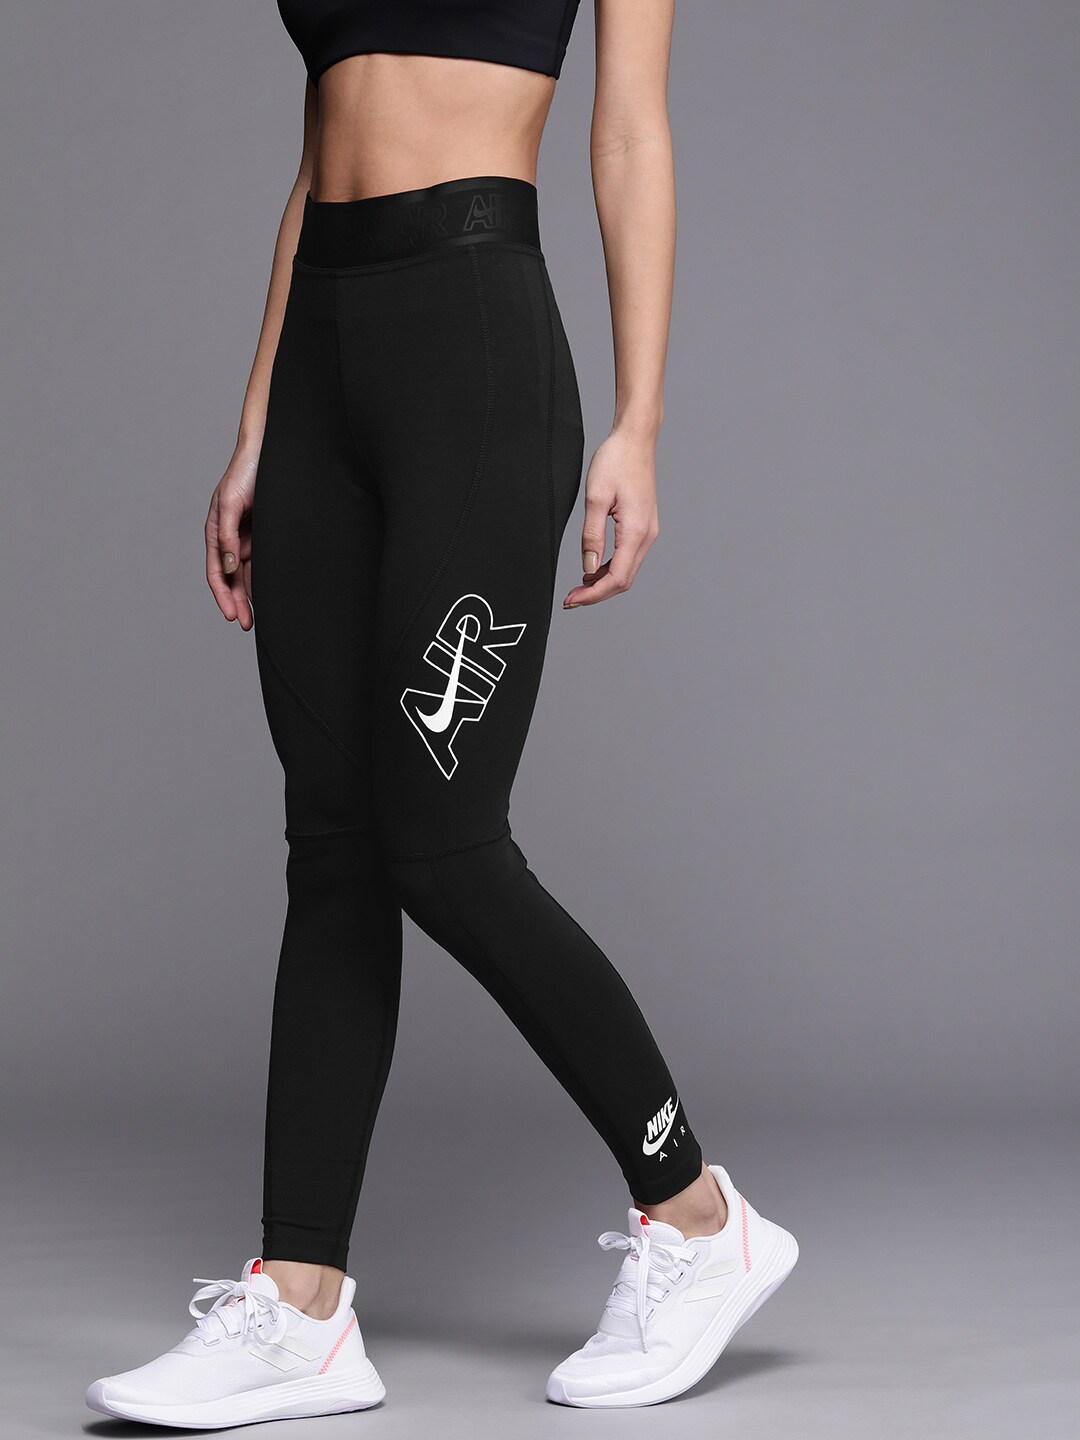 Nike Air Women Black Printed High-Rise Tights Price in India